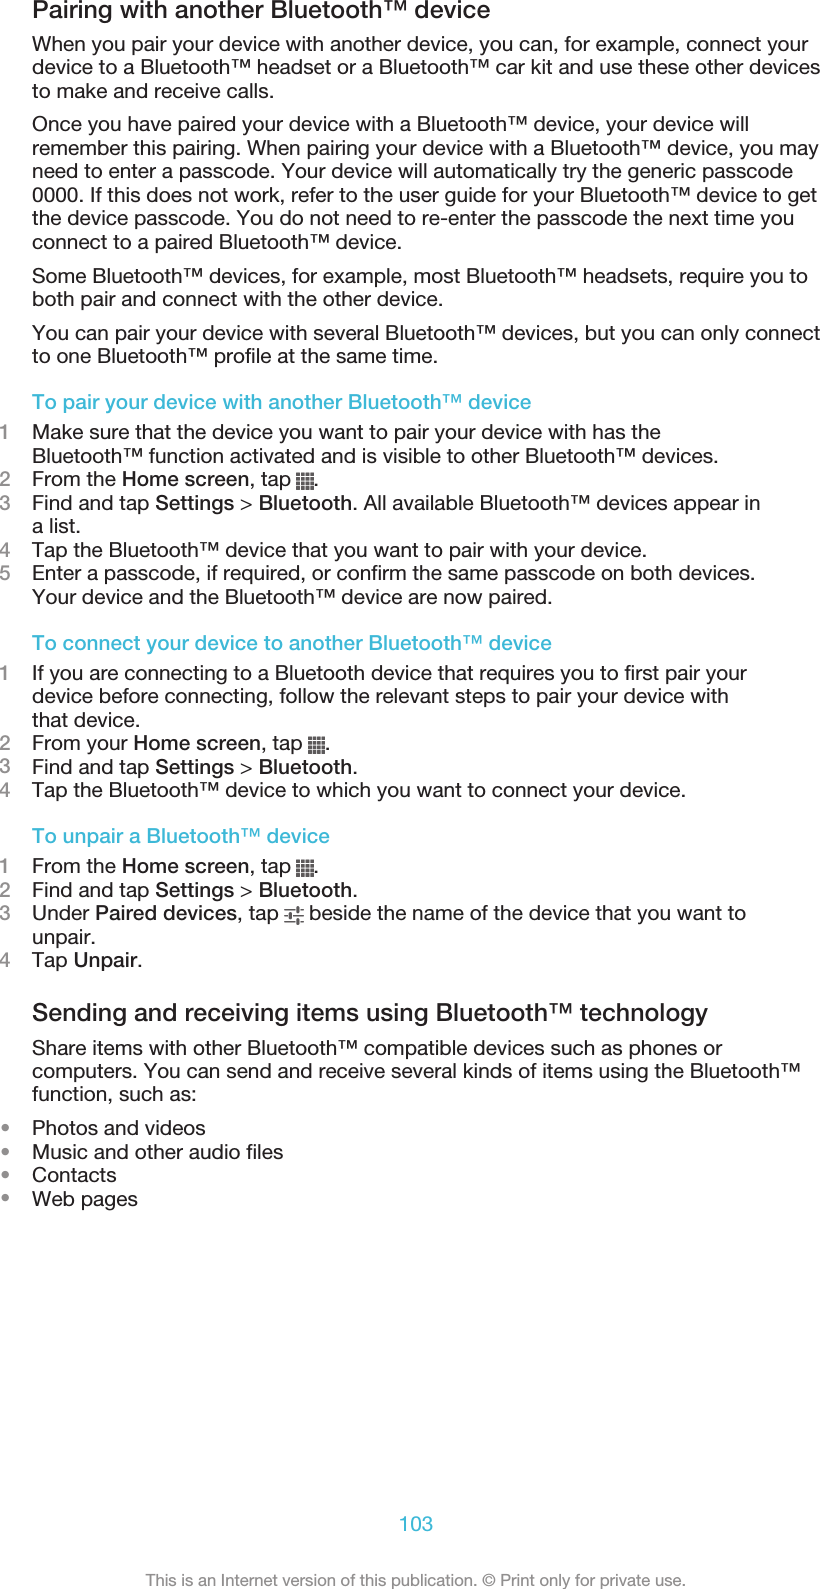 Pairing with another Bluetooth™ deviceWhen you pair your device with another device, you can, for example, connect yourdevice to a Bluetooth™ headset or a Bluetooth™ car kit and use these other devicesto make and receive calls.Once you have paired your device with a Bluetooth™ device, your device willremember this pairing. When pairing your device with a Bluetooth™ device, you mayneed to enter a passcode. Your device will automatically try the generic passcode0000. If this does not work, refer to the user guide for your Bluetooth™ device to getthe device passcode. You do not need to re-enter the passcode the next time youconnect to a paired Bluetooth™ device.Some Bluetooth™ devices, for example, most Bluetooth™ headsets, require you toboth pair and connect with the other device.You can pair your device with several Bluetooth™ devices, but you can only connectto one Bluetooth™ profile at the same time.To pair your device with another Bluetooth™ device1Make sure that the device you want to pair your device with has theBluetooth™ function activated and is visible to other Bluetooth™ devices.2From the Home screen, tap  .3Find and tap Settings &gt; Bluetooth. All available Bluetooth™ devices appear ina list.4Tap the Bluetooth™ device that you want to pair with your device.5Enter a passcode, if required, or confirm the same passcode on both devices.Your device and the Bluetooth™ device are now paired.To connect your device to another Bluetooth™ device1If you are connecting to a Bluetooth device that requires you to first pair yourdevice before connecting, follow the relevant steps to pair your device withthat device.2From your Home screen, tap  .3Find and tap Settings &gt; Bluetooth.4Tap the Bluetooth™ device to which you want to connect your device.To unpair a Bluetooth™ device1From the Home screen, tap  .2Find and tap Settings &gt; Bluetooth.3Under Paired devices, tap   beside the name of the device that you want tounpair.4Tap Unpair.Sending and receiving items using Bluetooth™ technologyShare items with other Bluetooth™ compatible devices such as phones orcomputers. You can send and receive several kinds of items using the Bluetooth™function, such as:•Photos and videos•Music and other audio files•Contacts•Web pages103This is an Internet version of this publication. © Print only for private use.